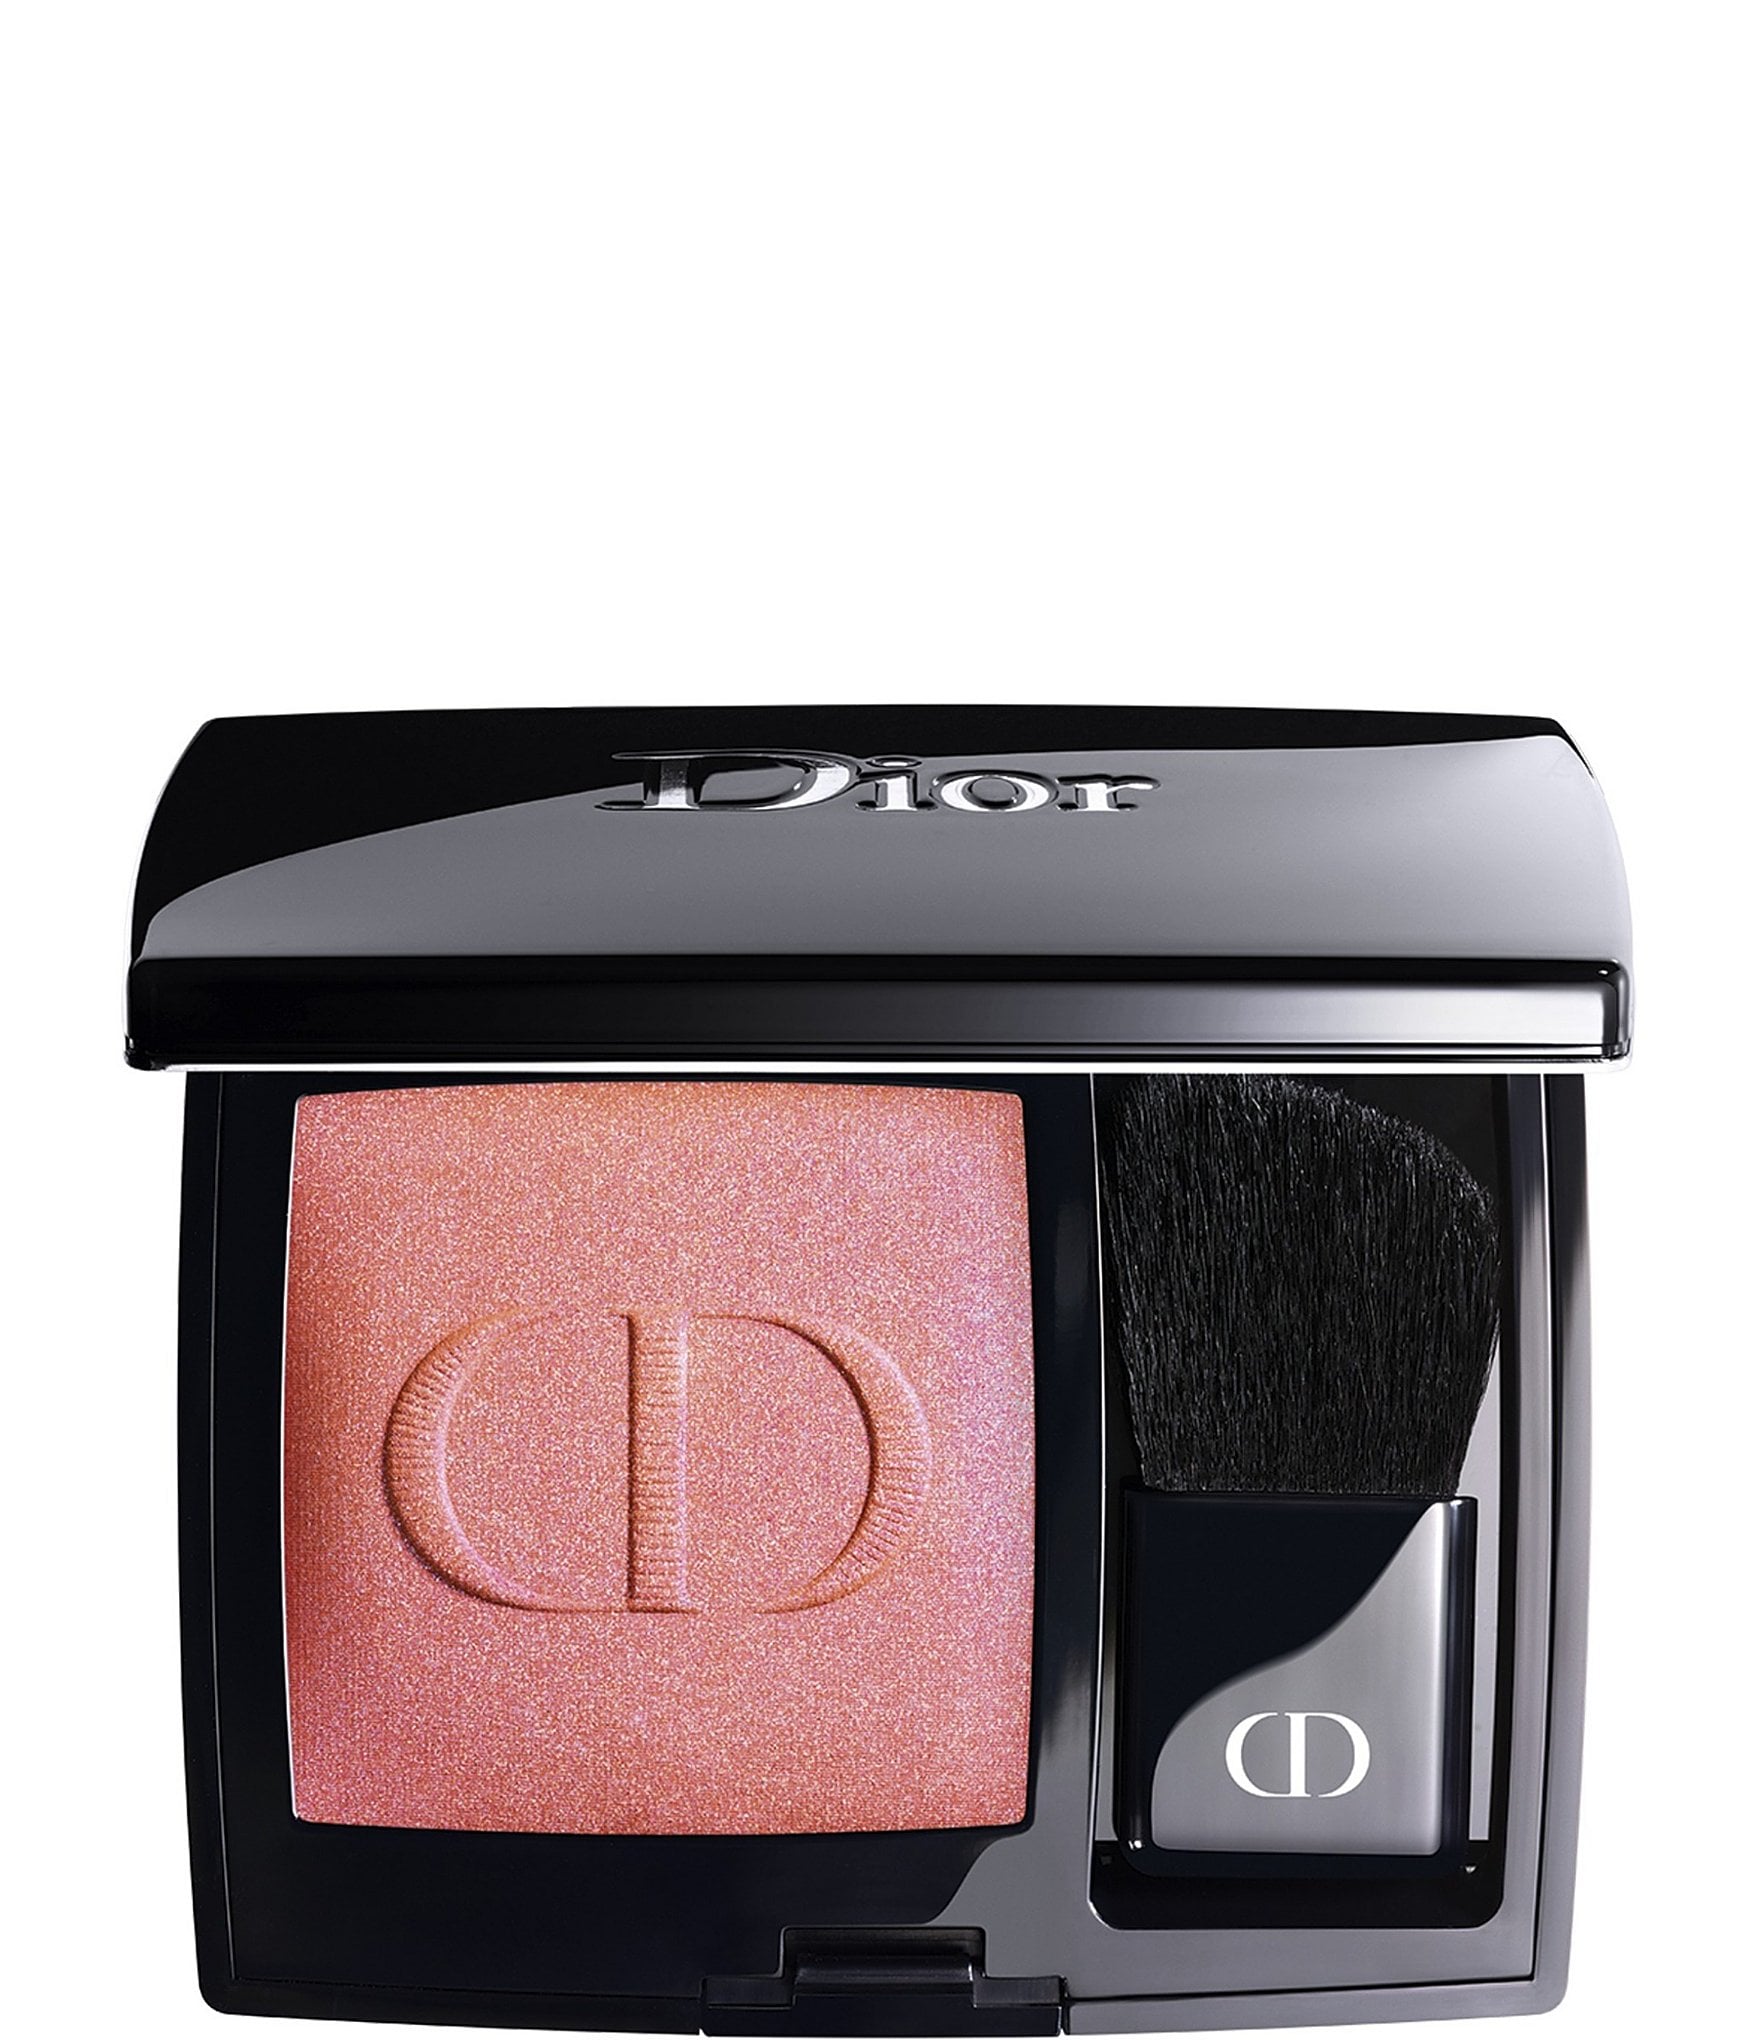 Dior  Fall 2018 Dior en Diable Collection Review and Swatches  The Happy  Sloths Beauty Makeup and Skincare Blog with Reviews and Swatches